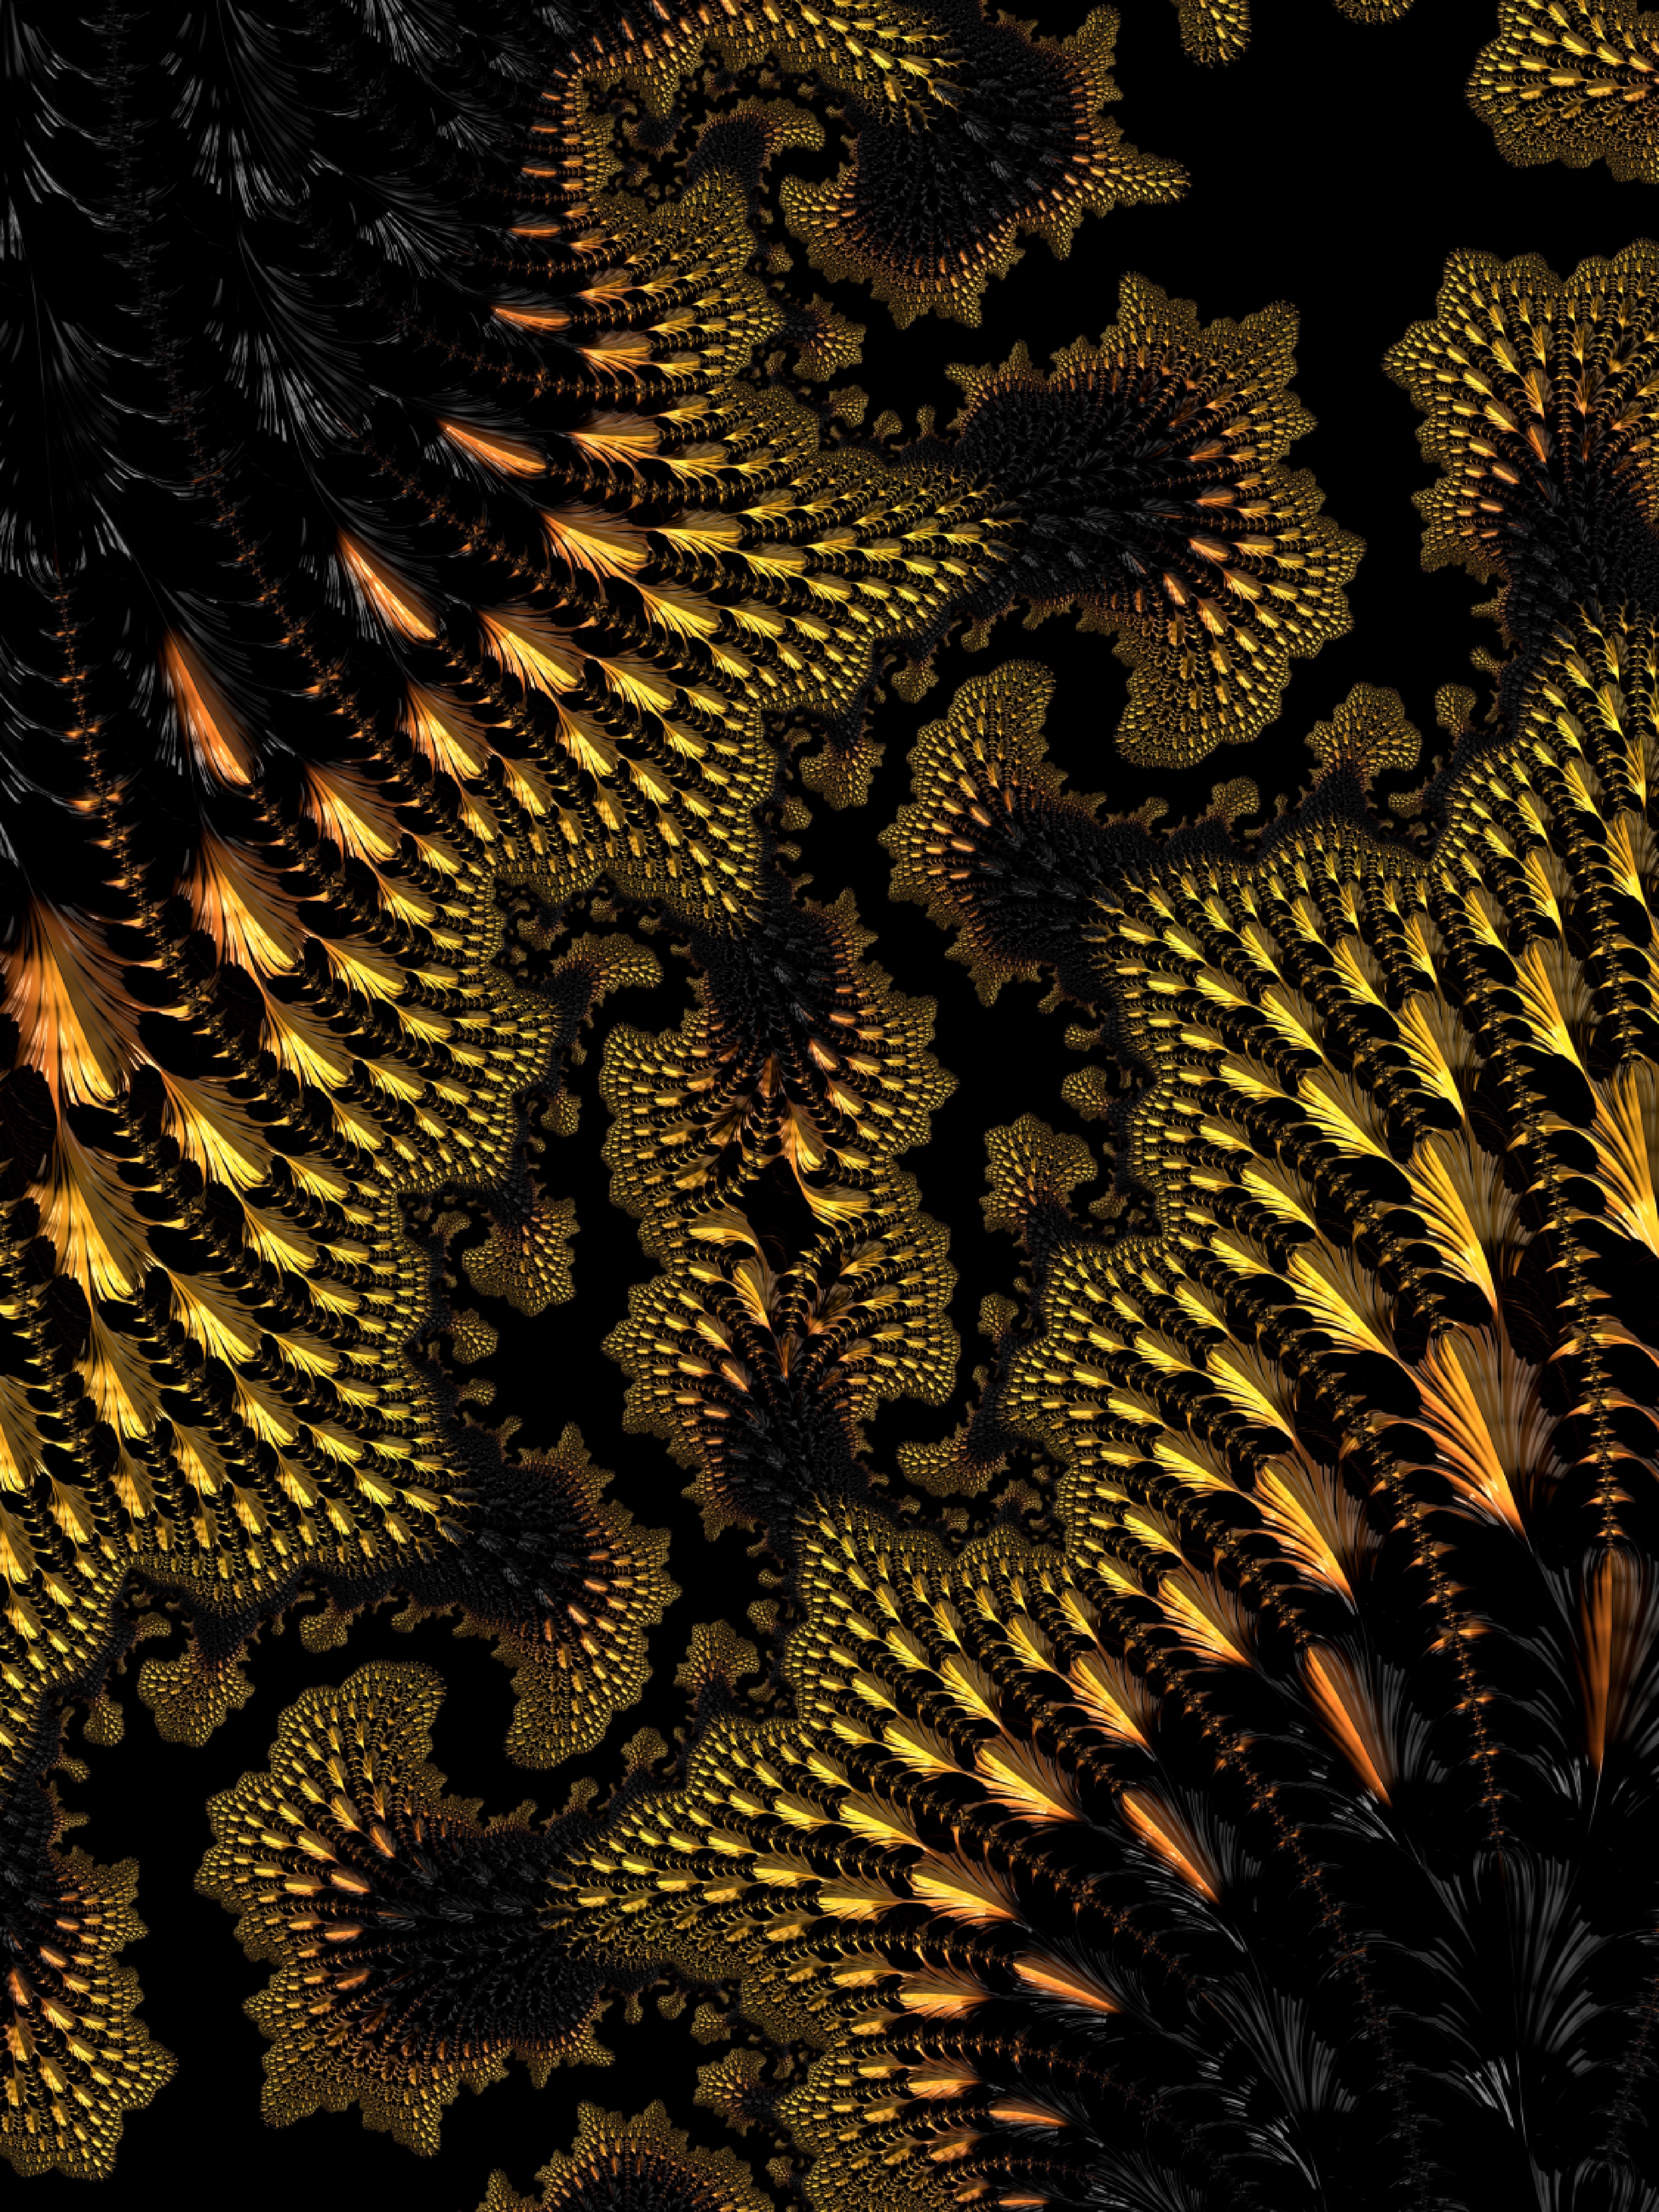 87964 2560x1080 PC pictures for free, download fractal, sinuous, black, winding 2560x1080 wallpapers on your desktop